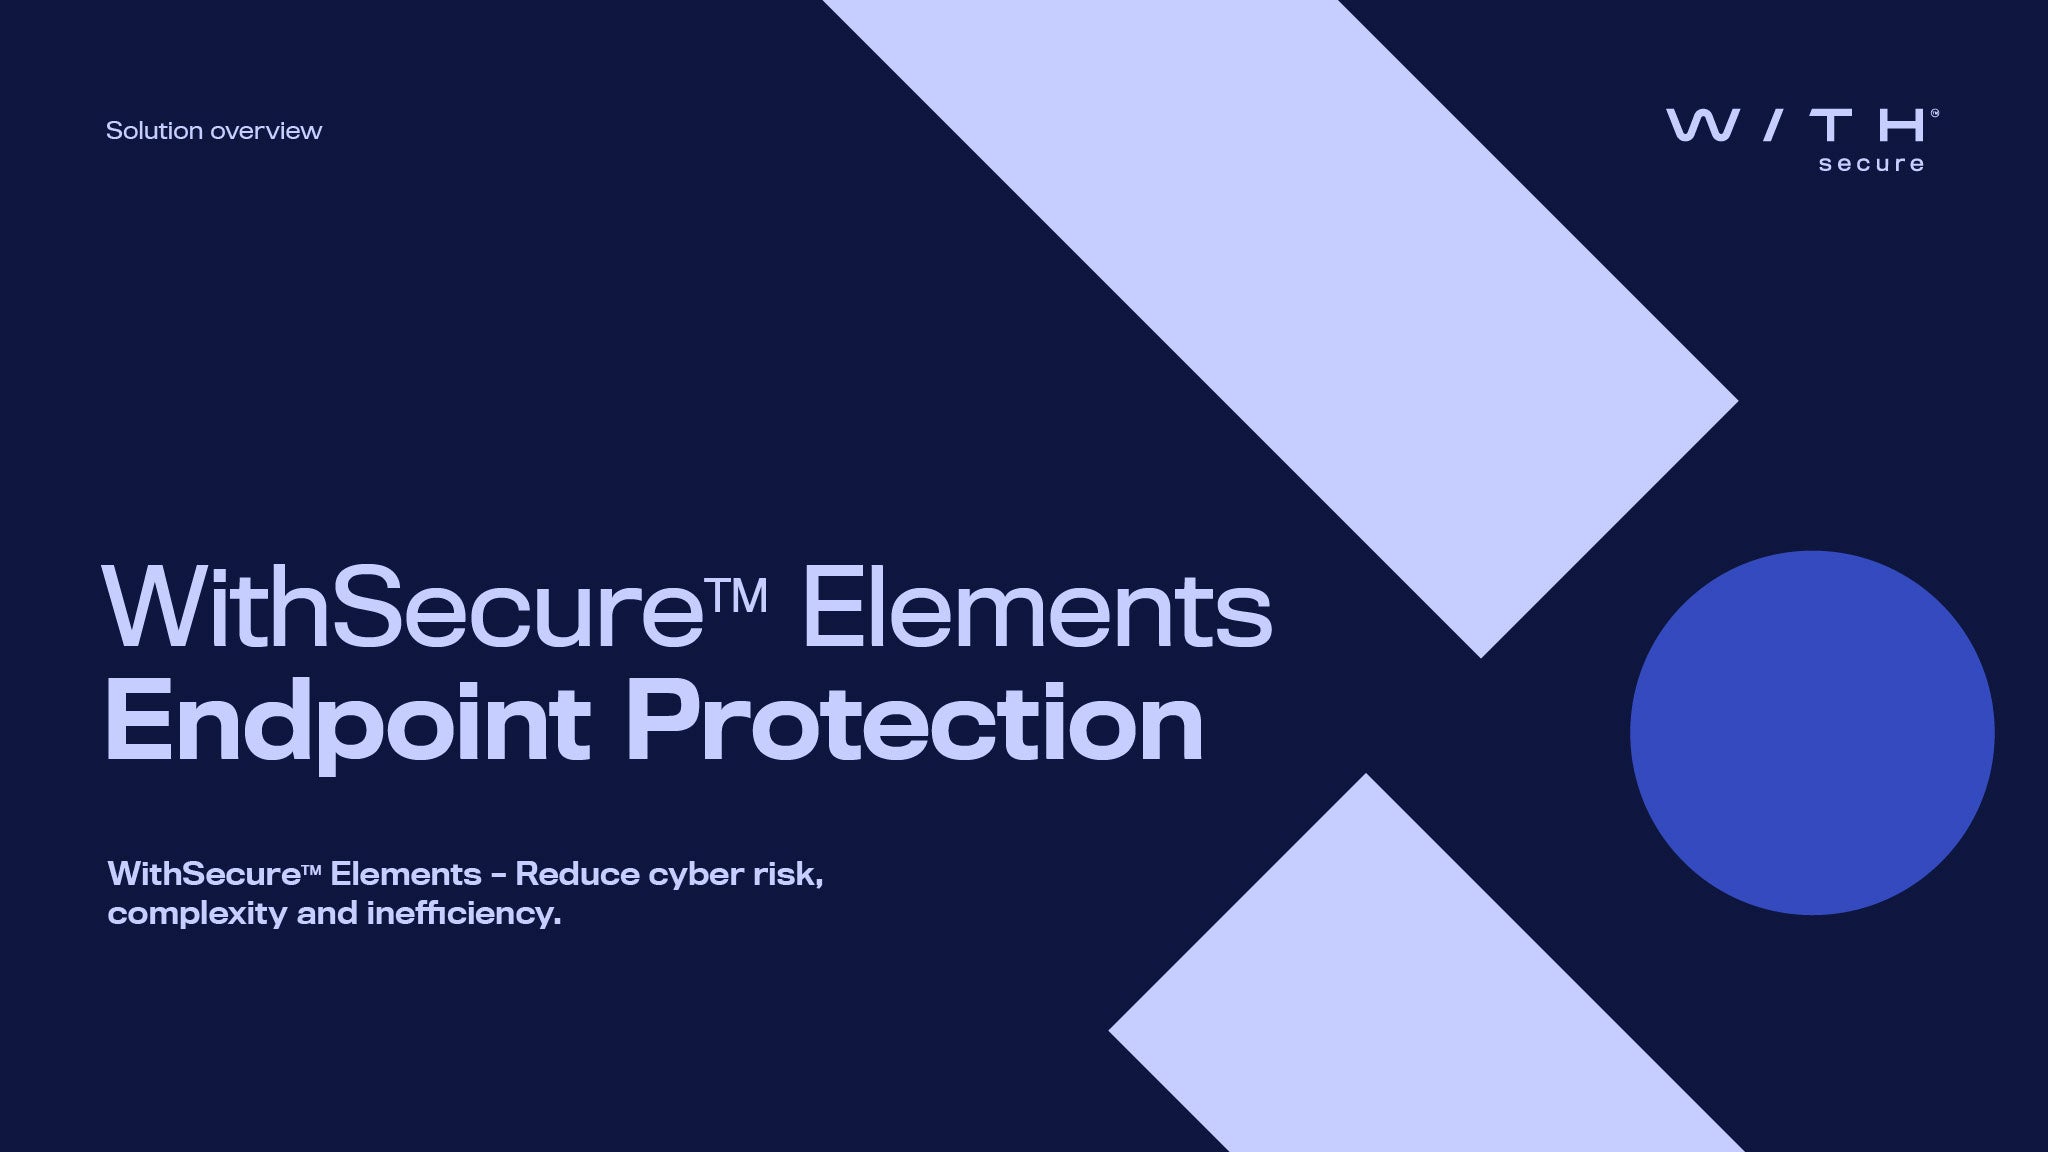 WS_elements_protection_solution_overview_EN